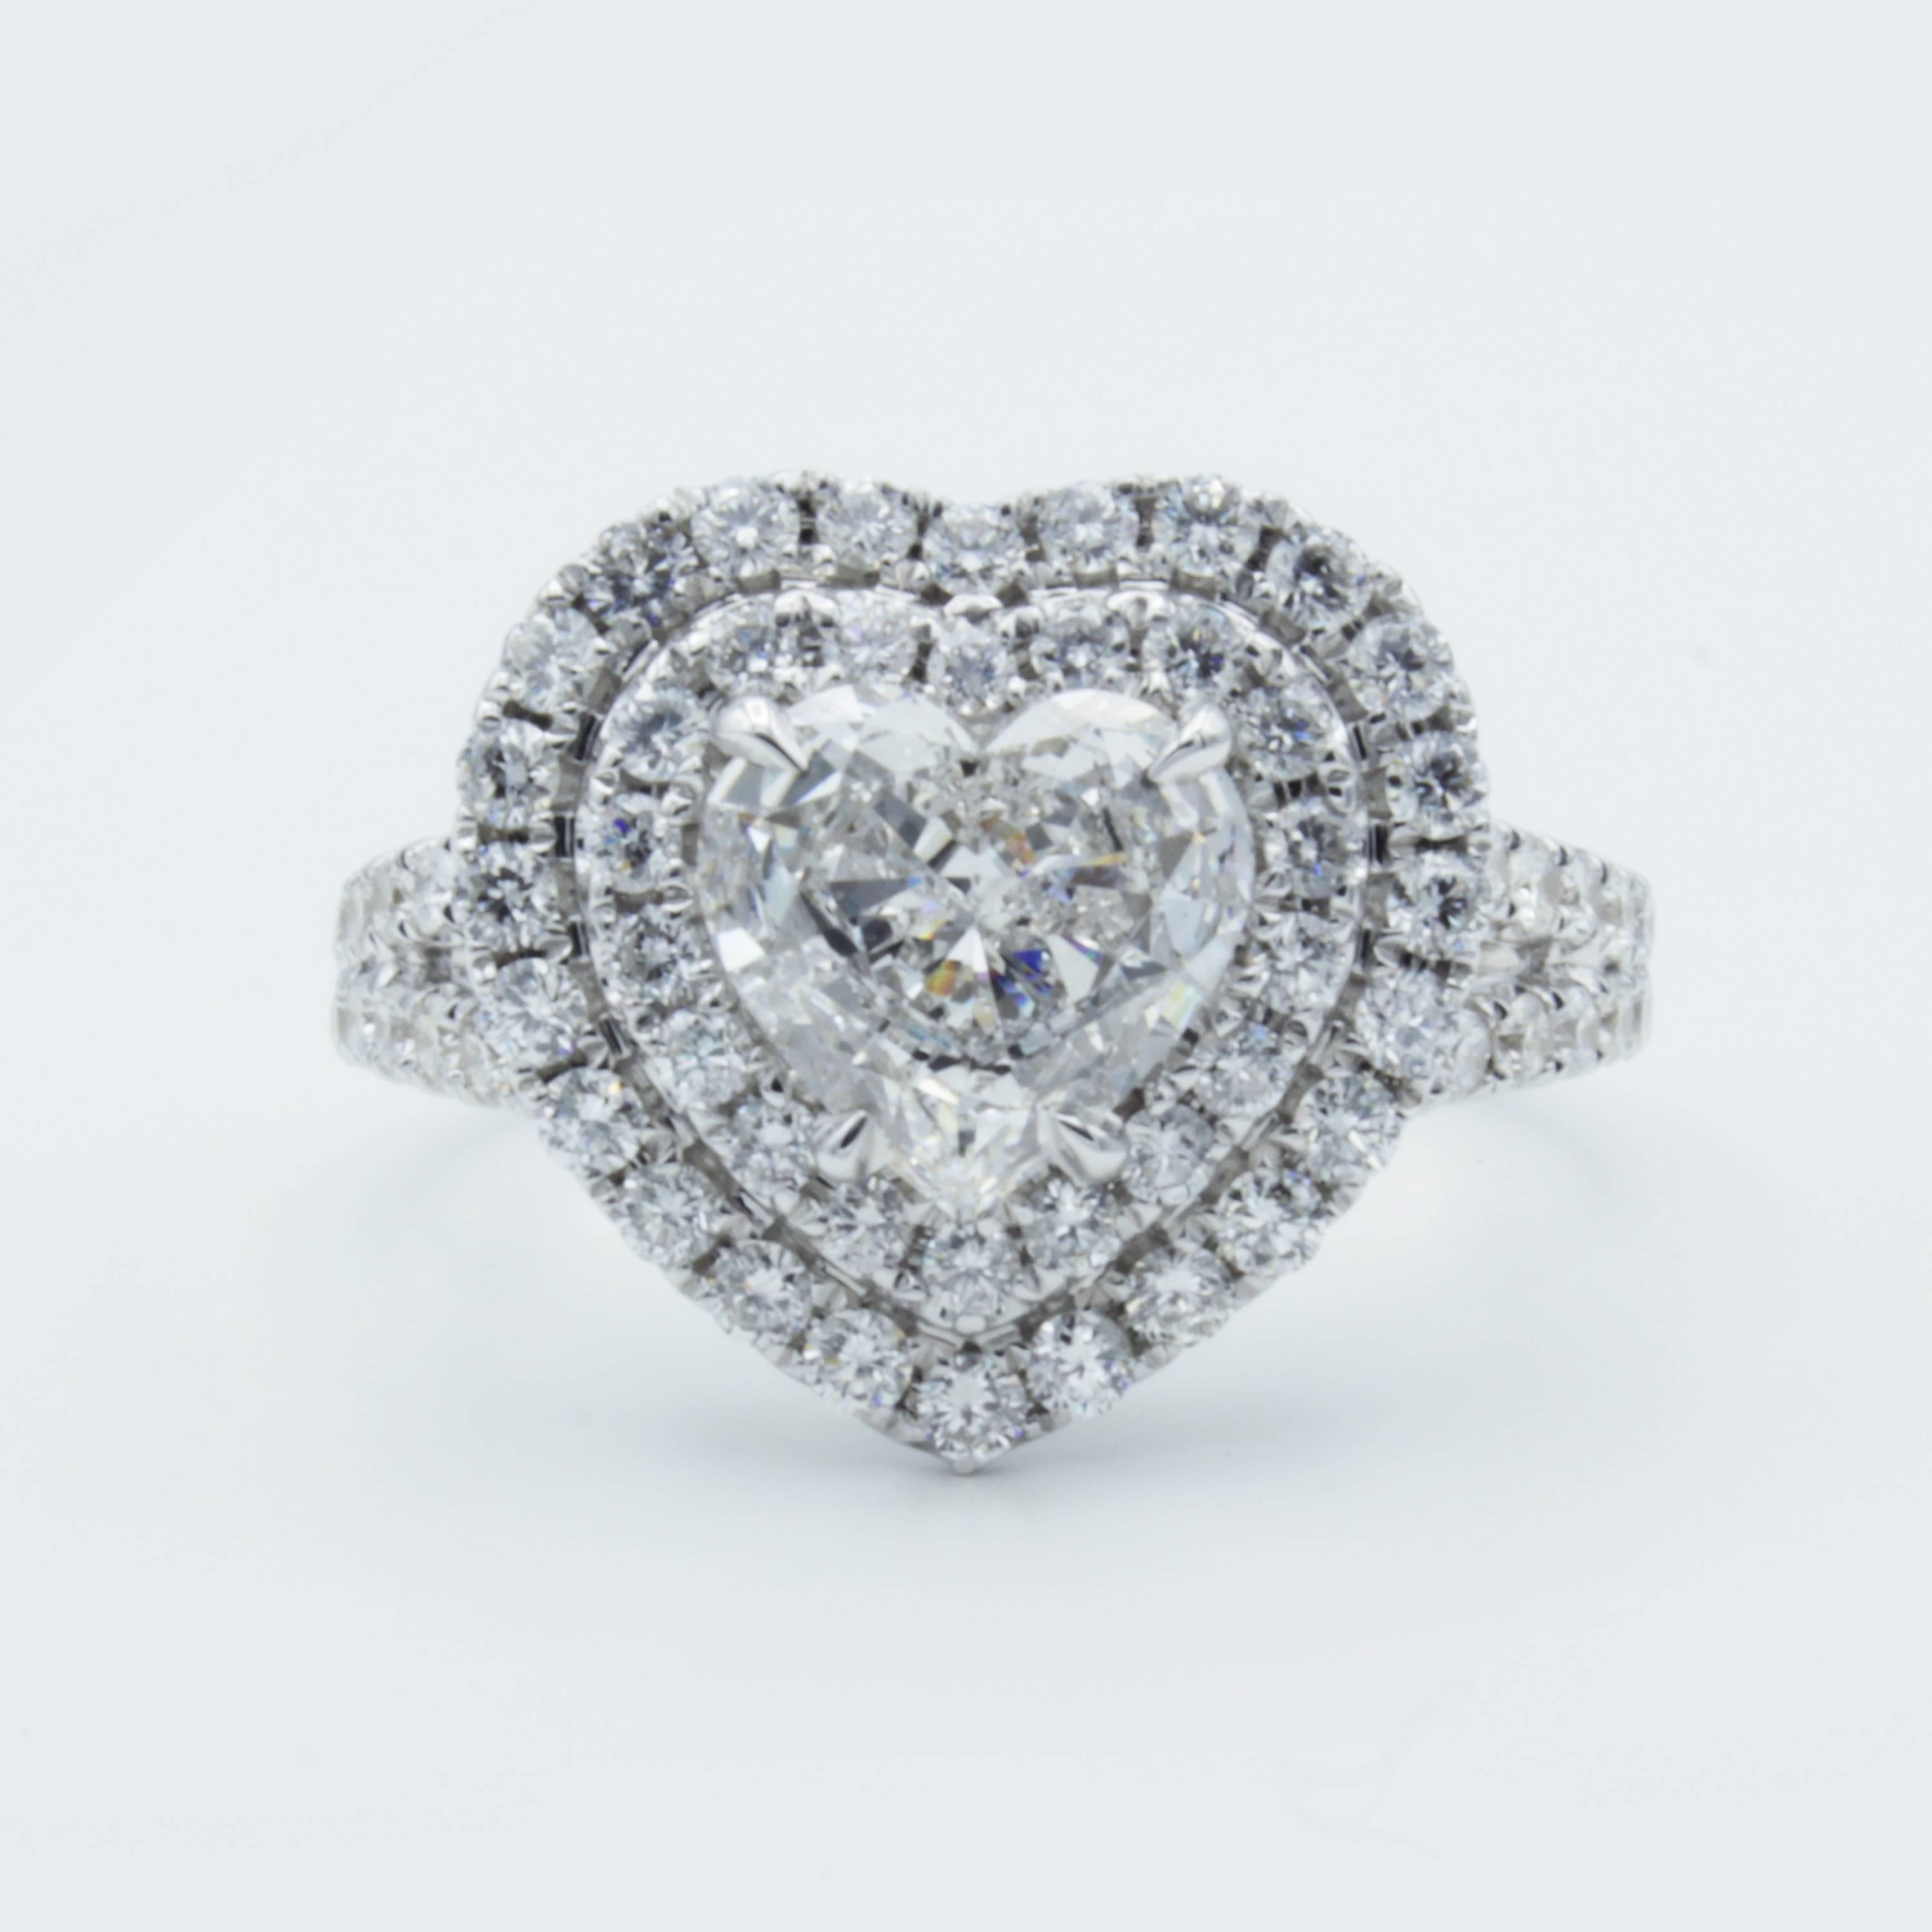 This gorgeous Rosenberg Diamonds & Co. engagement ring displays a beautiful range of sparkling colors within  1.18 carat Heart shaped diamond. A setting of 18Kt white gold displays just under a carat of sparkling pave set diamond accents across the